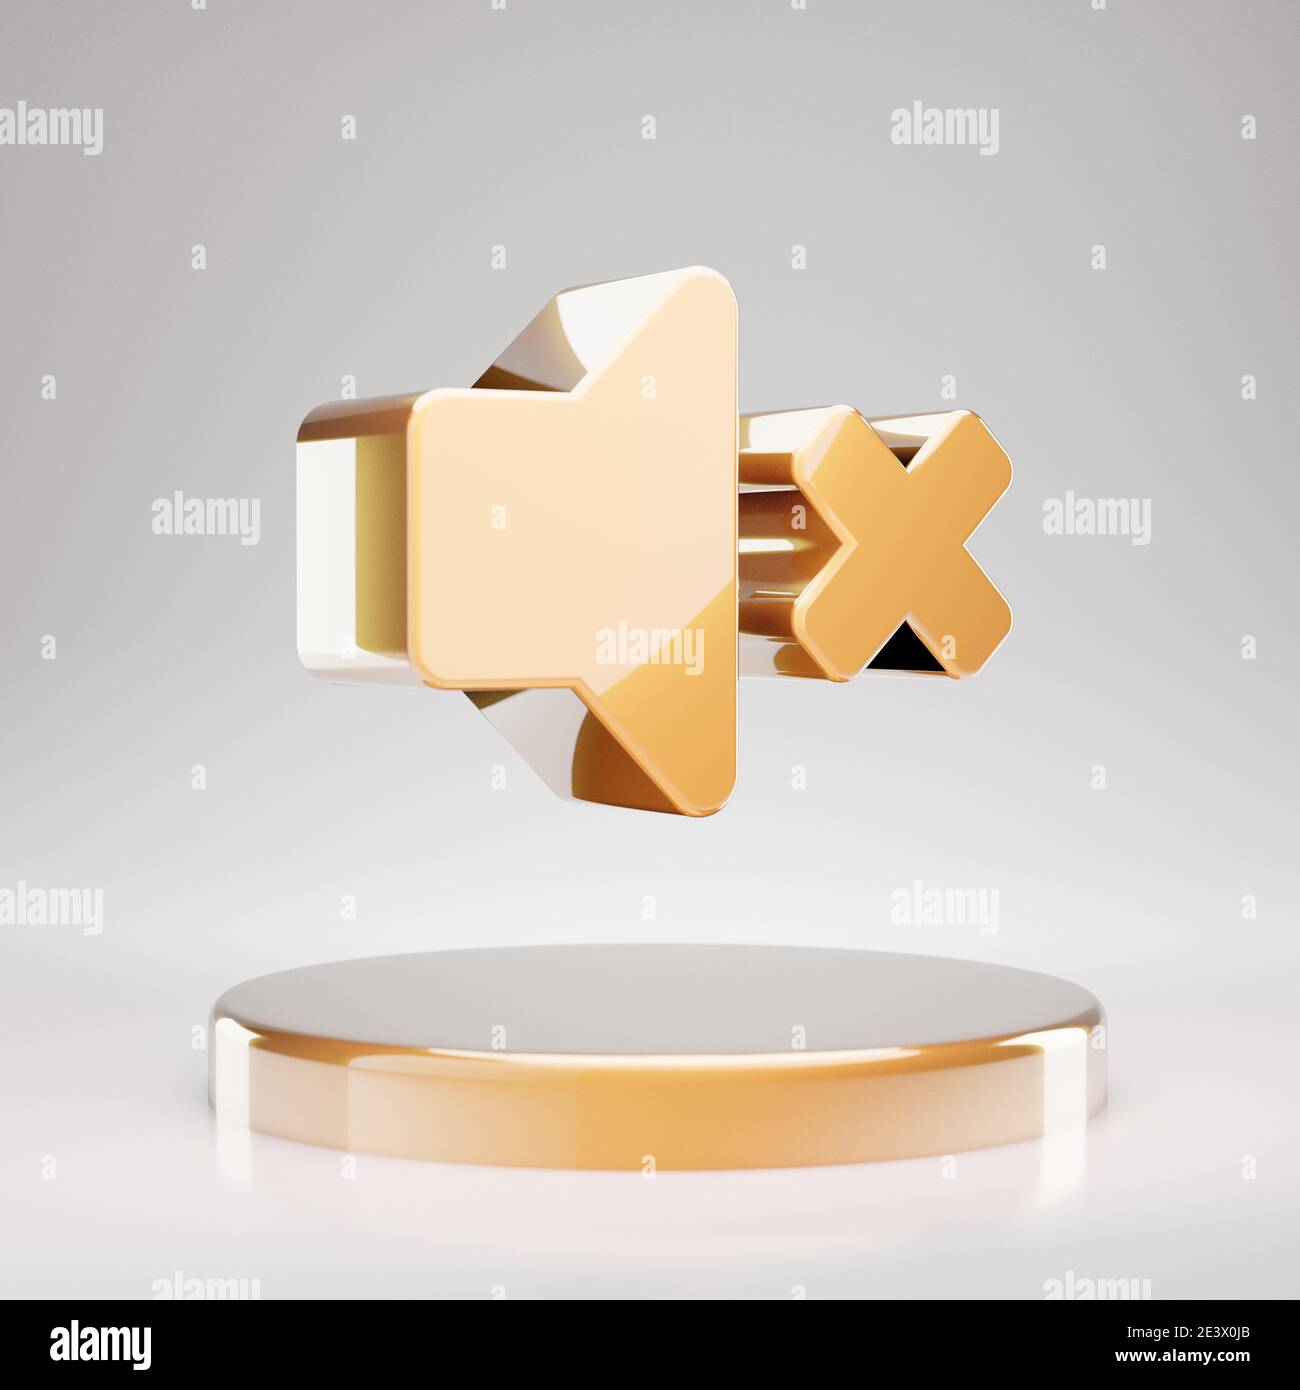 Mute Volume icon. Yellow Gold Mute symbol on golden podium. 3D rendered Social Media Icon. Stock Photo